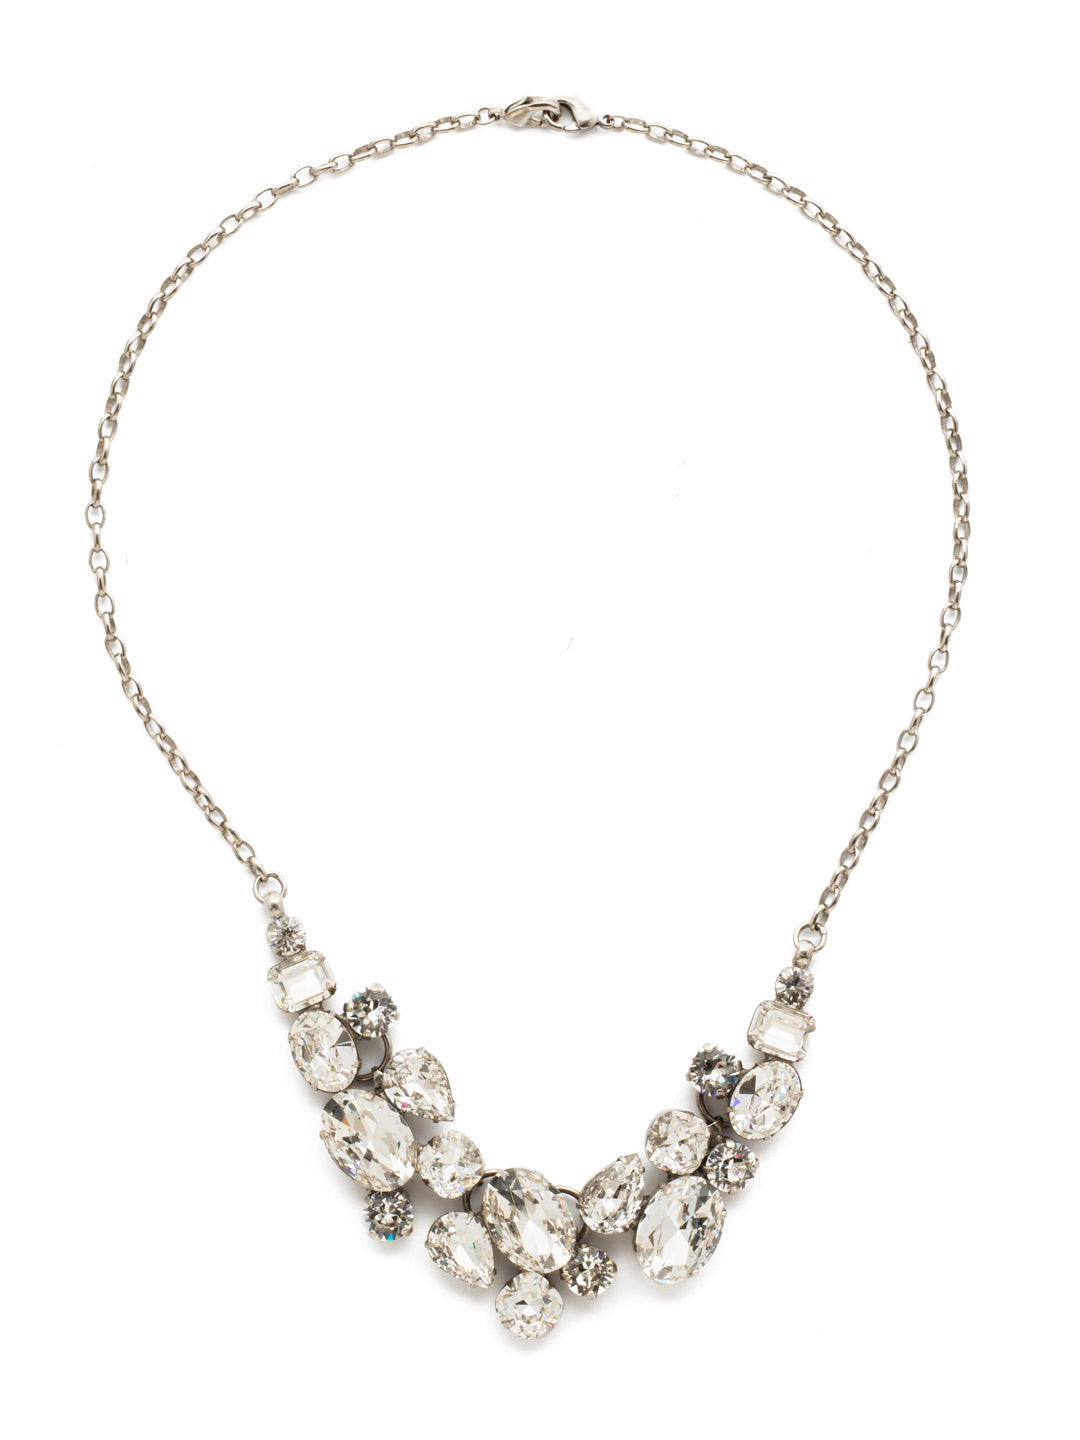 Forget-Me-Not Necklace Bib Necklace - NDQ6ASCRY - <p>Captivating clusters of oval, pear, emerald, cushion and round cut crystals form a design that's fun and easy with sparkle for days! This style also features a double lobster claw closure which allows for extreme length adjustment and easy layering with other necklaces. From Sorrelli's Crystal collection in our Antique Silver-tone finish.</p>